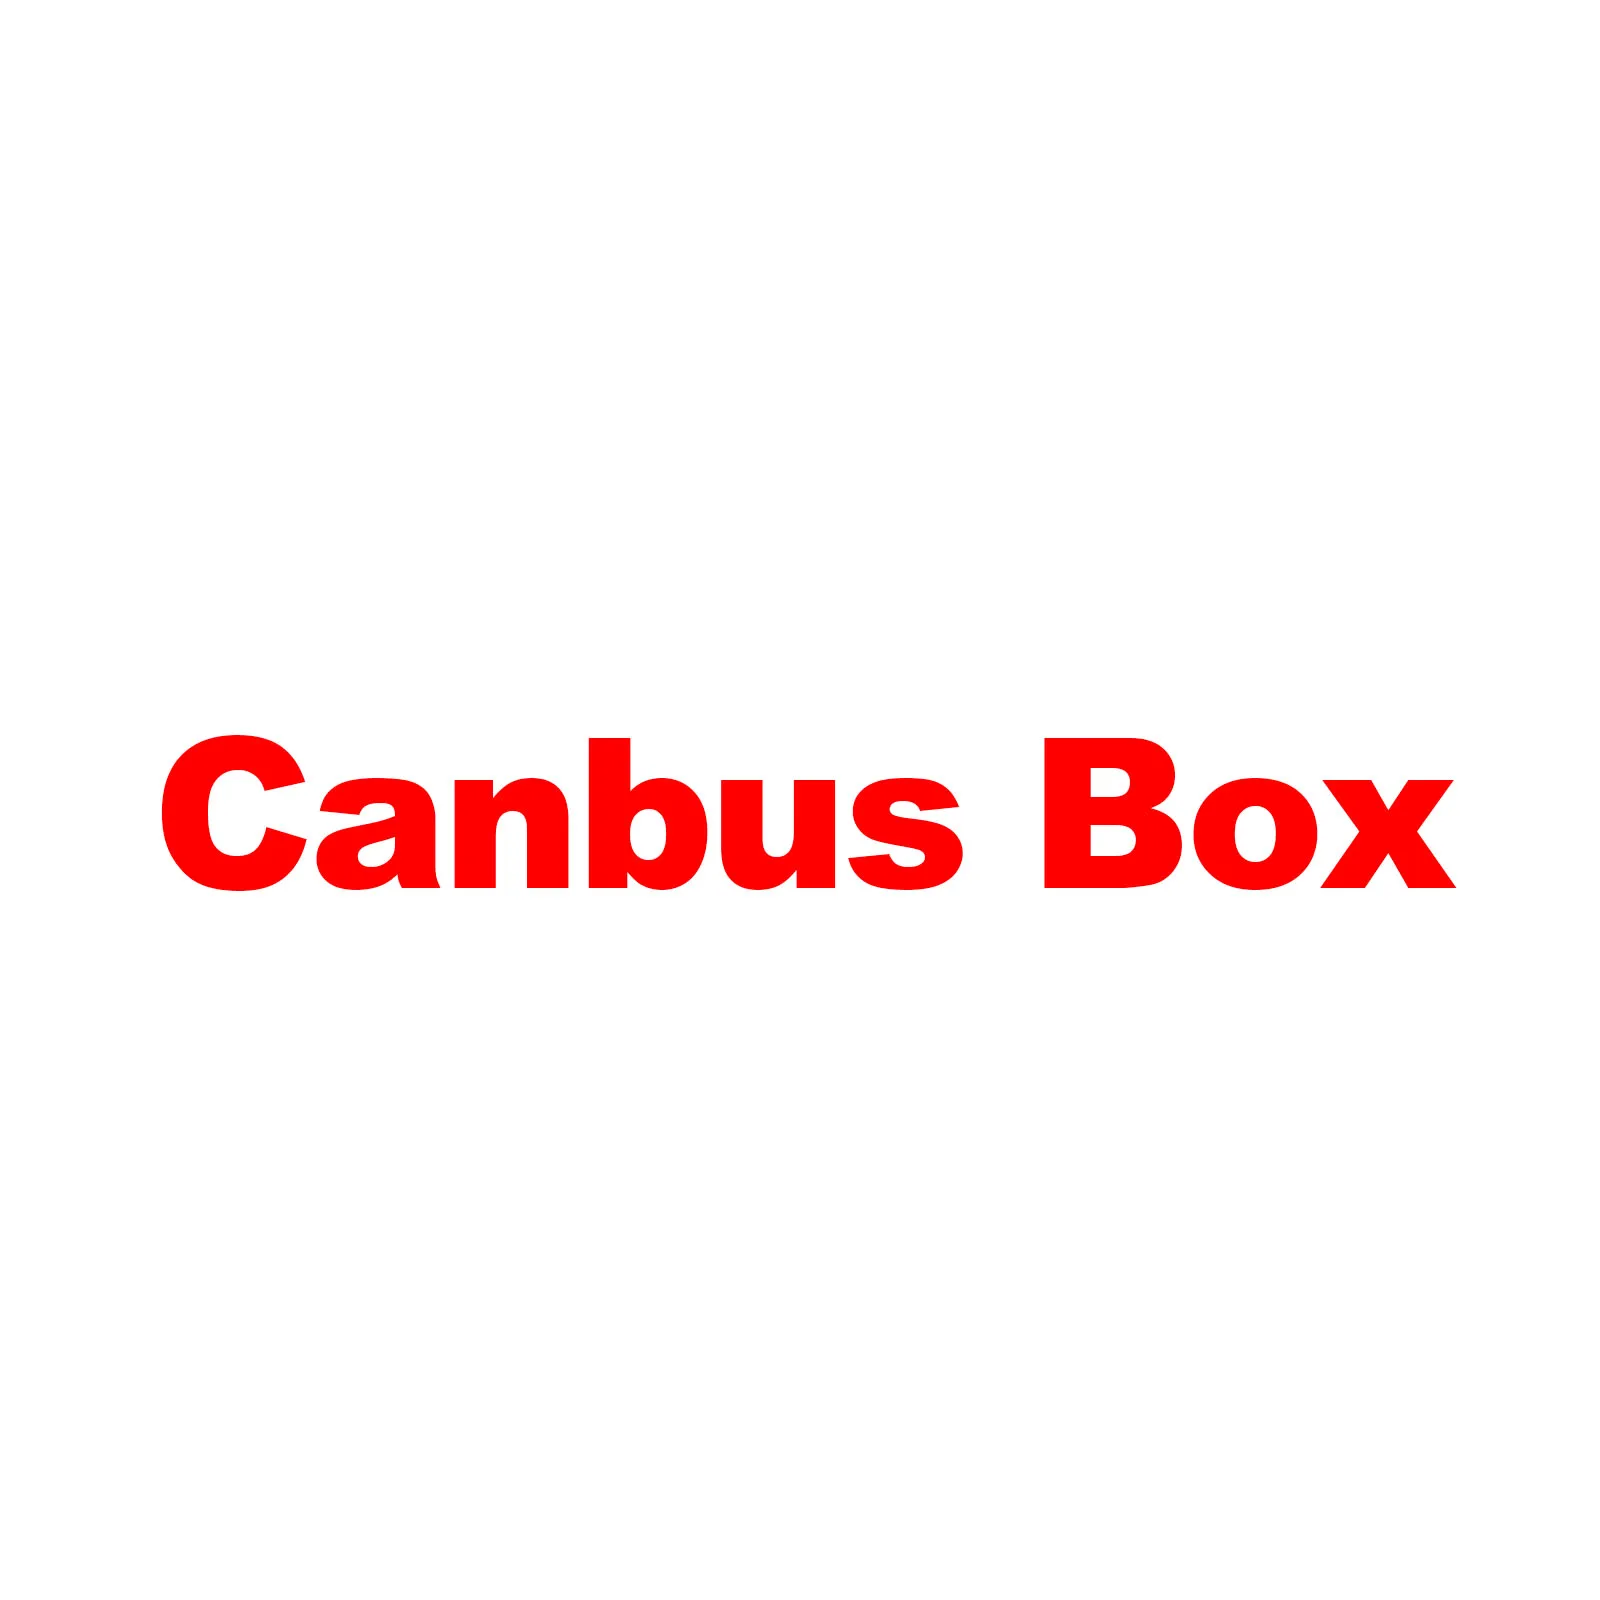 

This is only for customer who need to pay extra cost to buy the Canbus Box to make our device works with their car